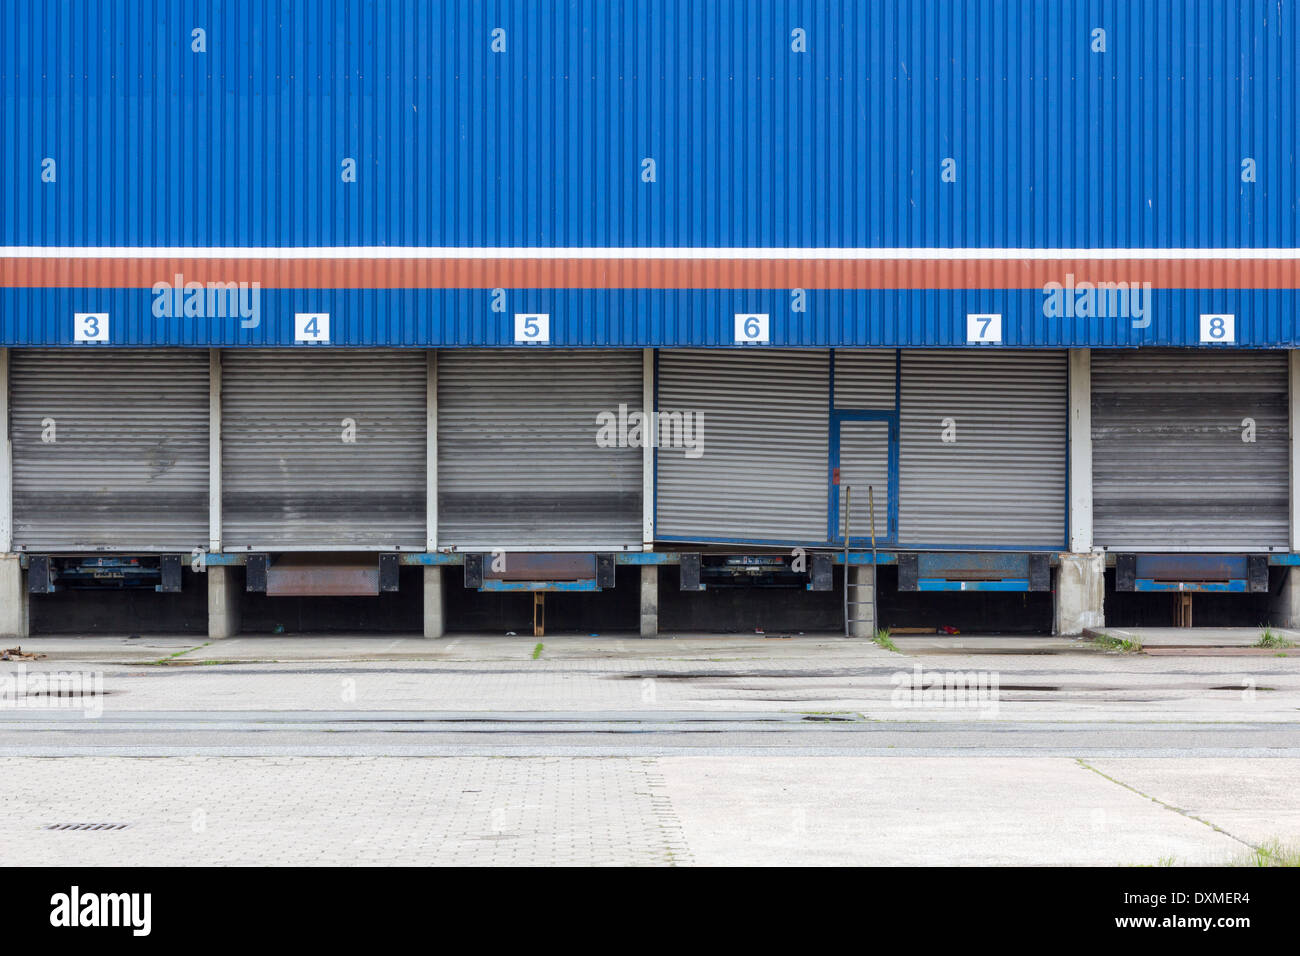 Shuttered and abandoned blue industrial loading dock. Stock Photo